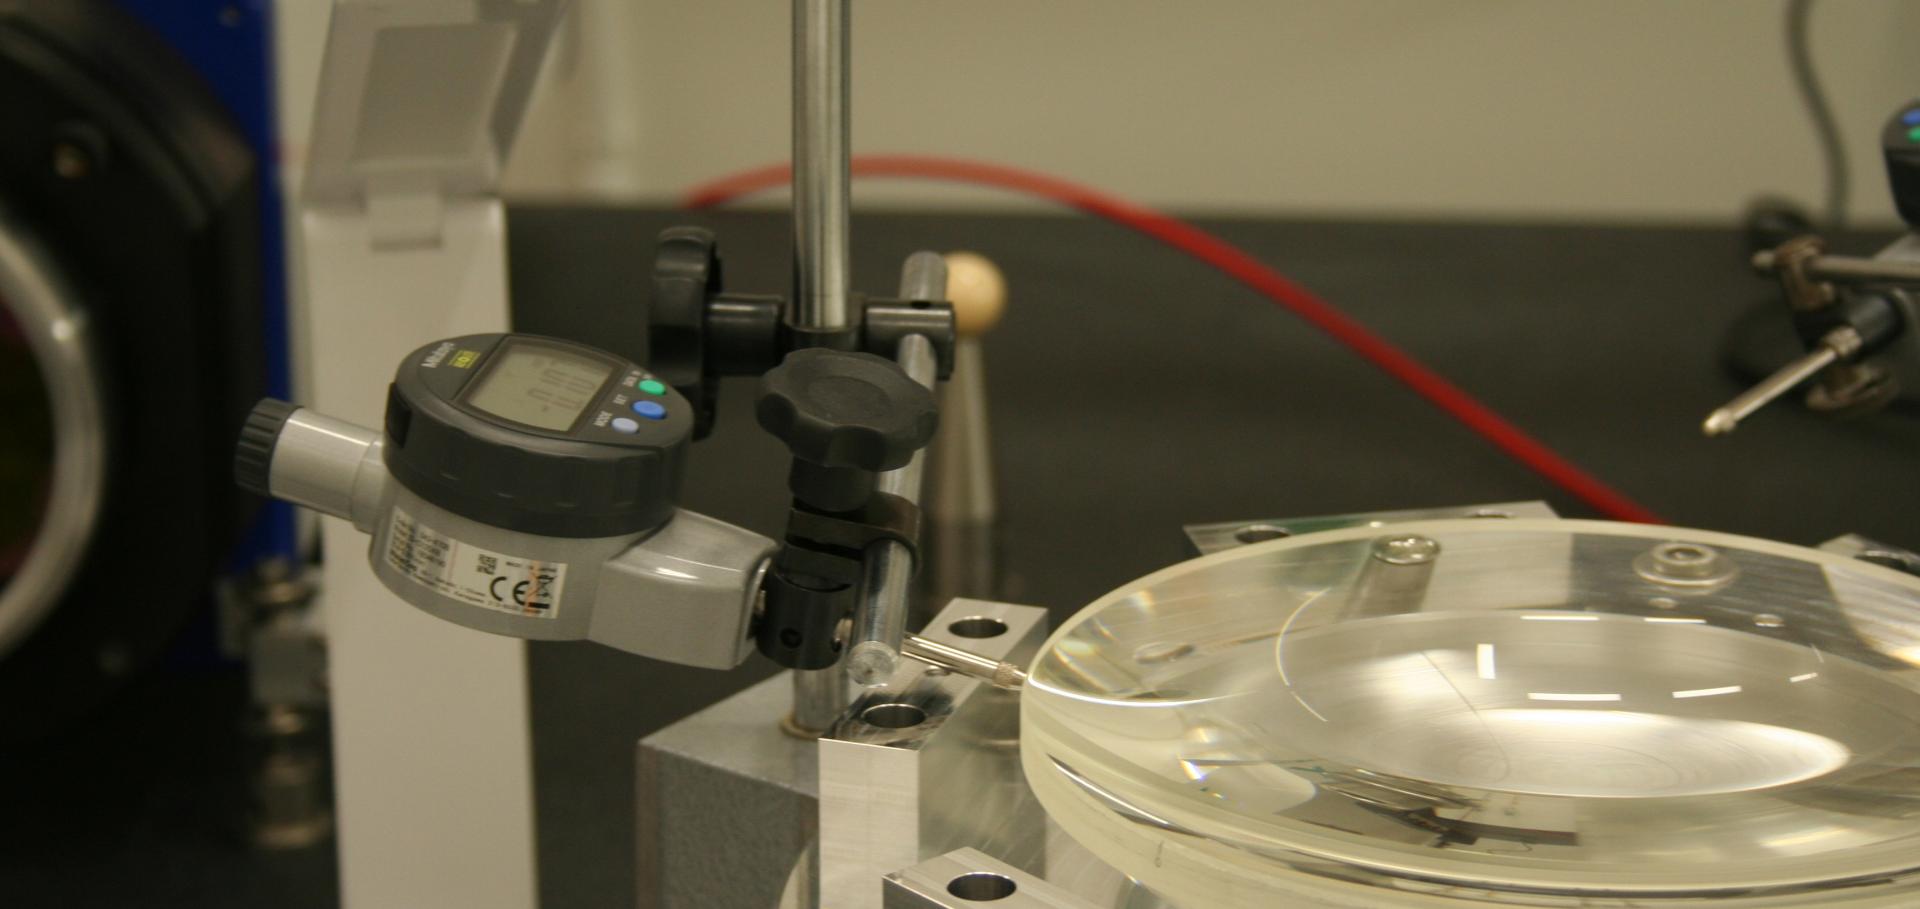 Lens being measured by a dial gauge in the lab, part of the assembly procedure